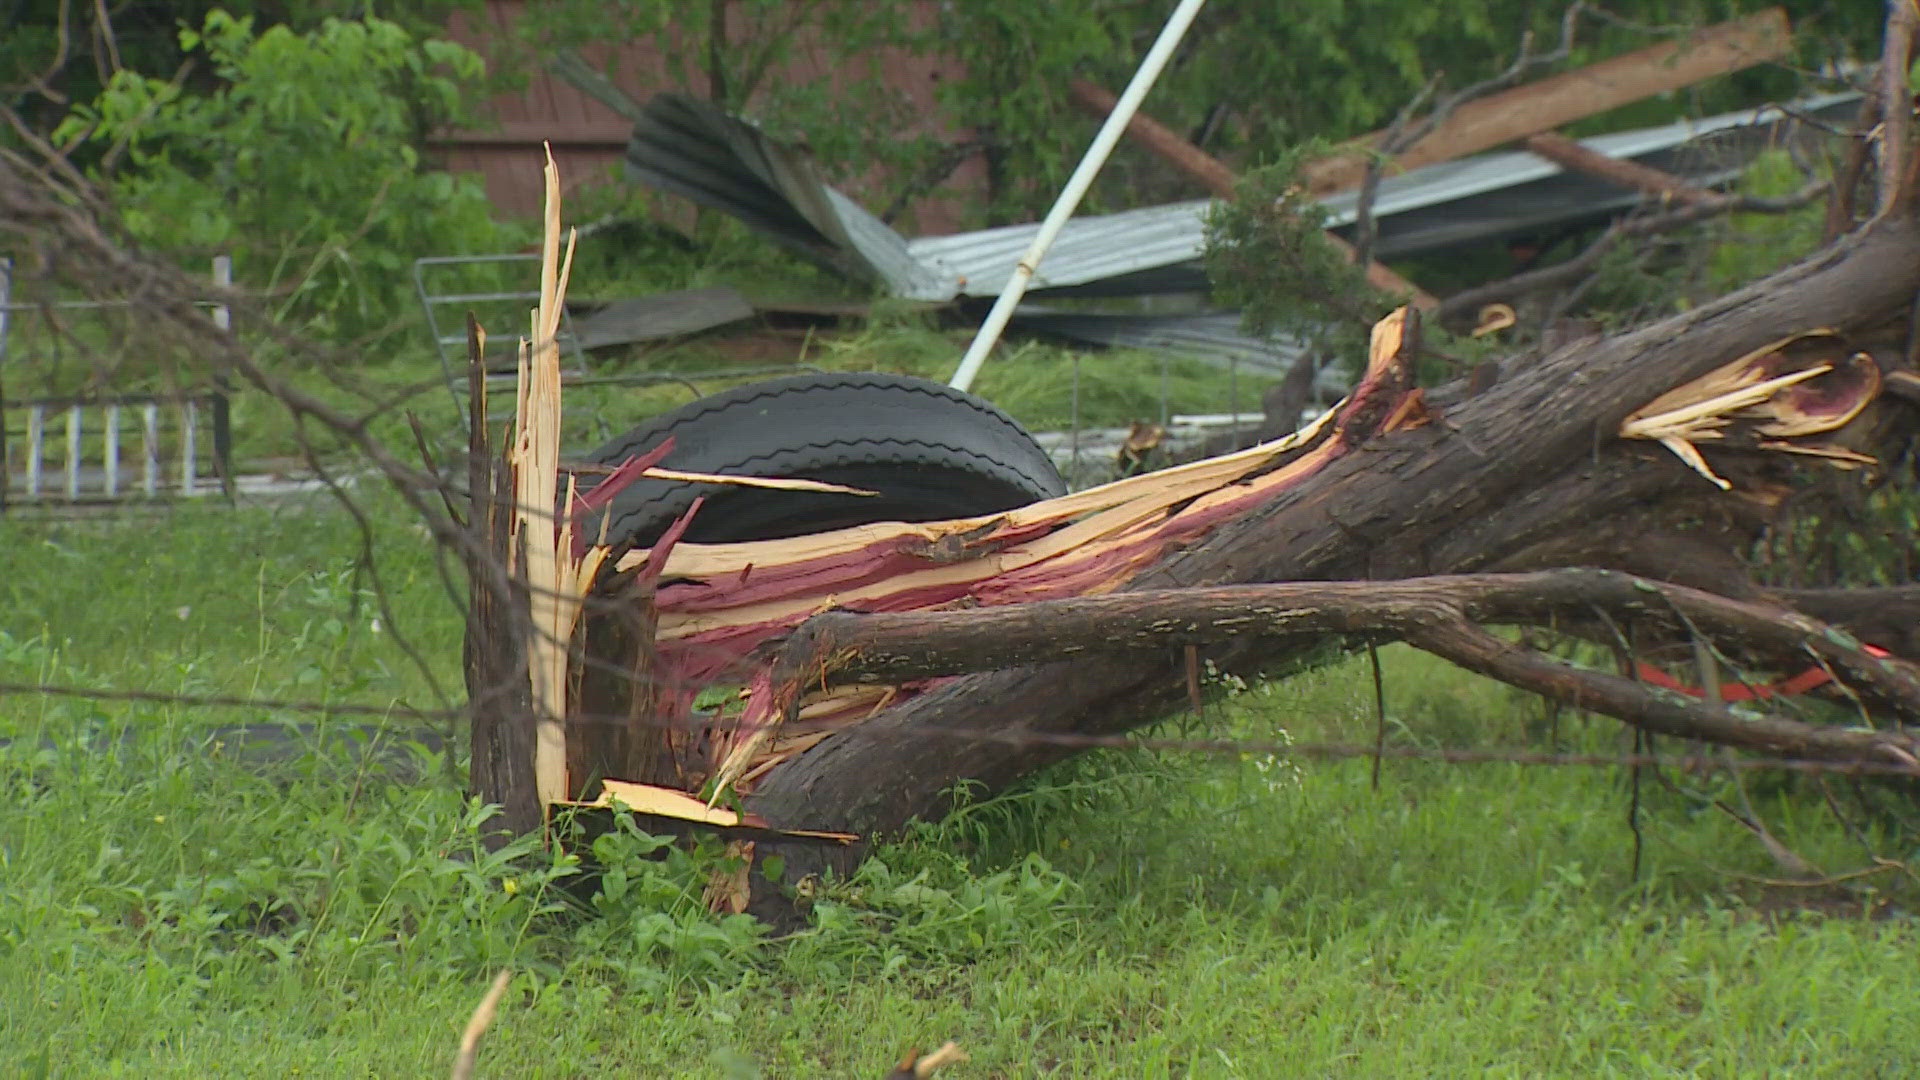 Damage was reported after storms moved through Friday.